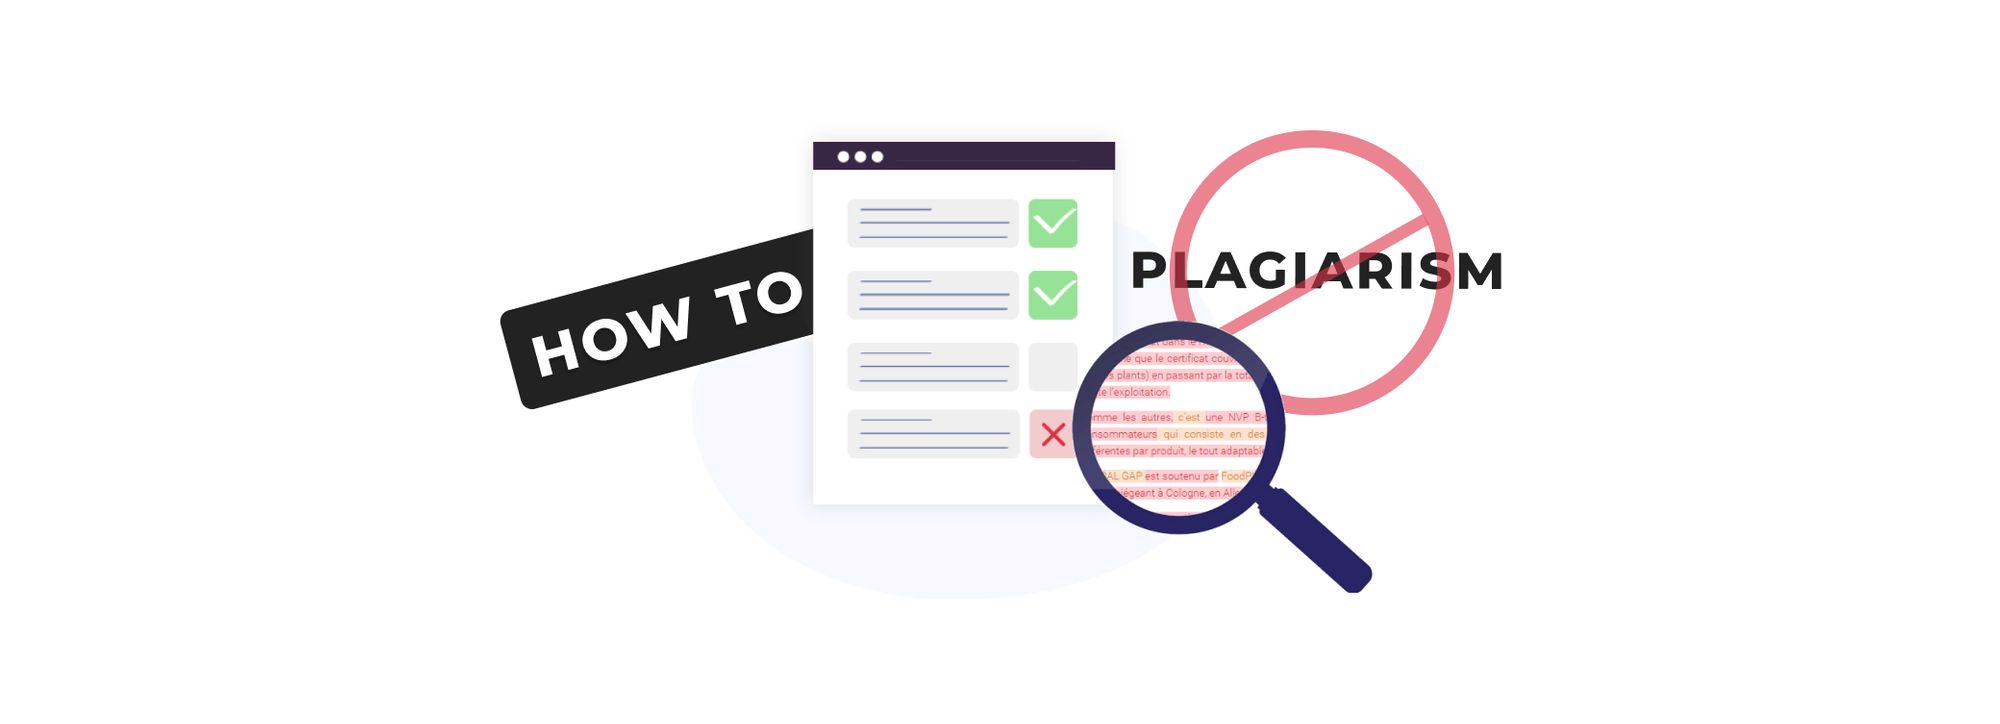 How to Check for Plagiarism